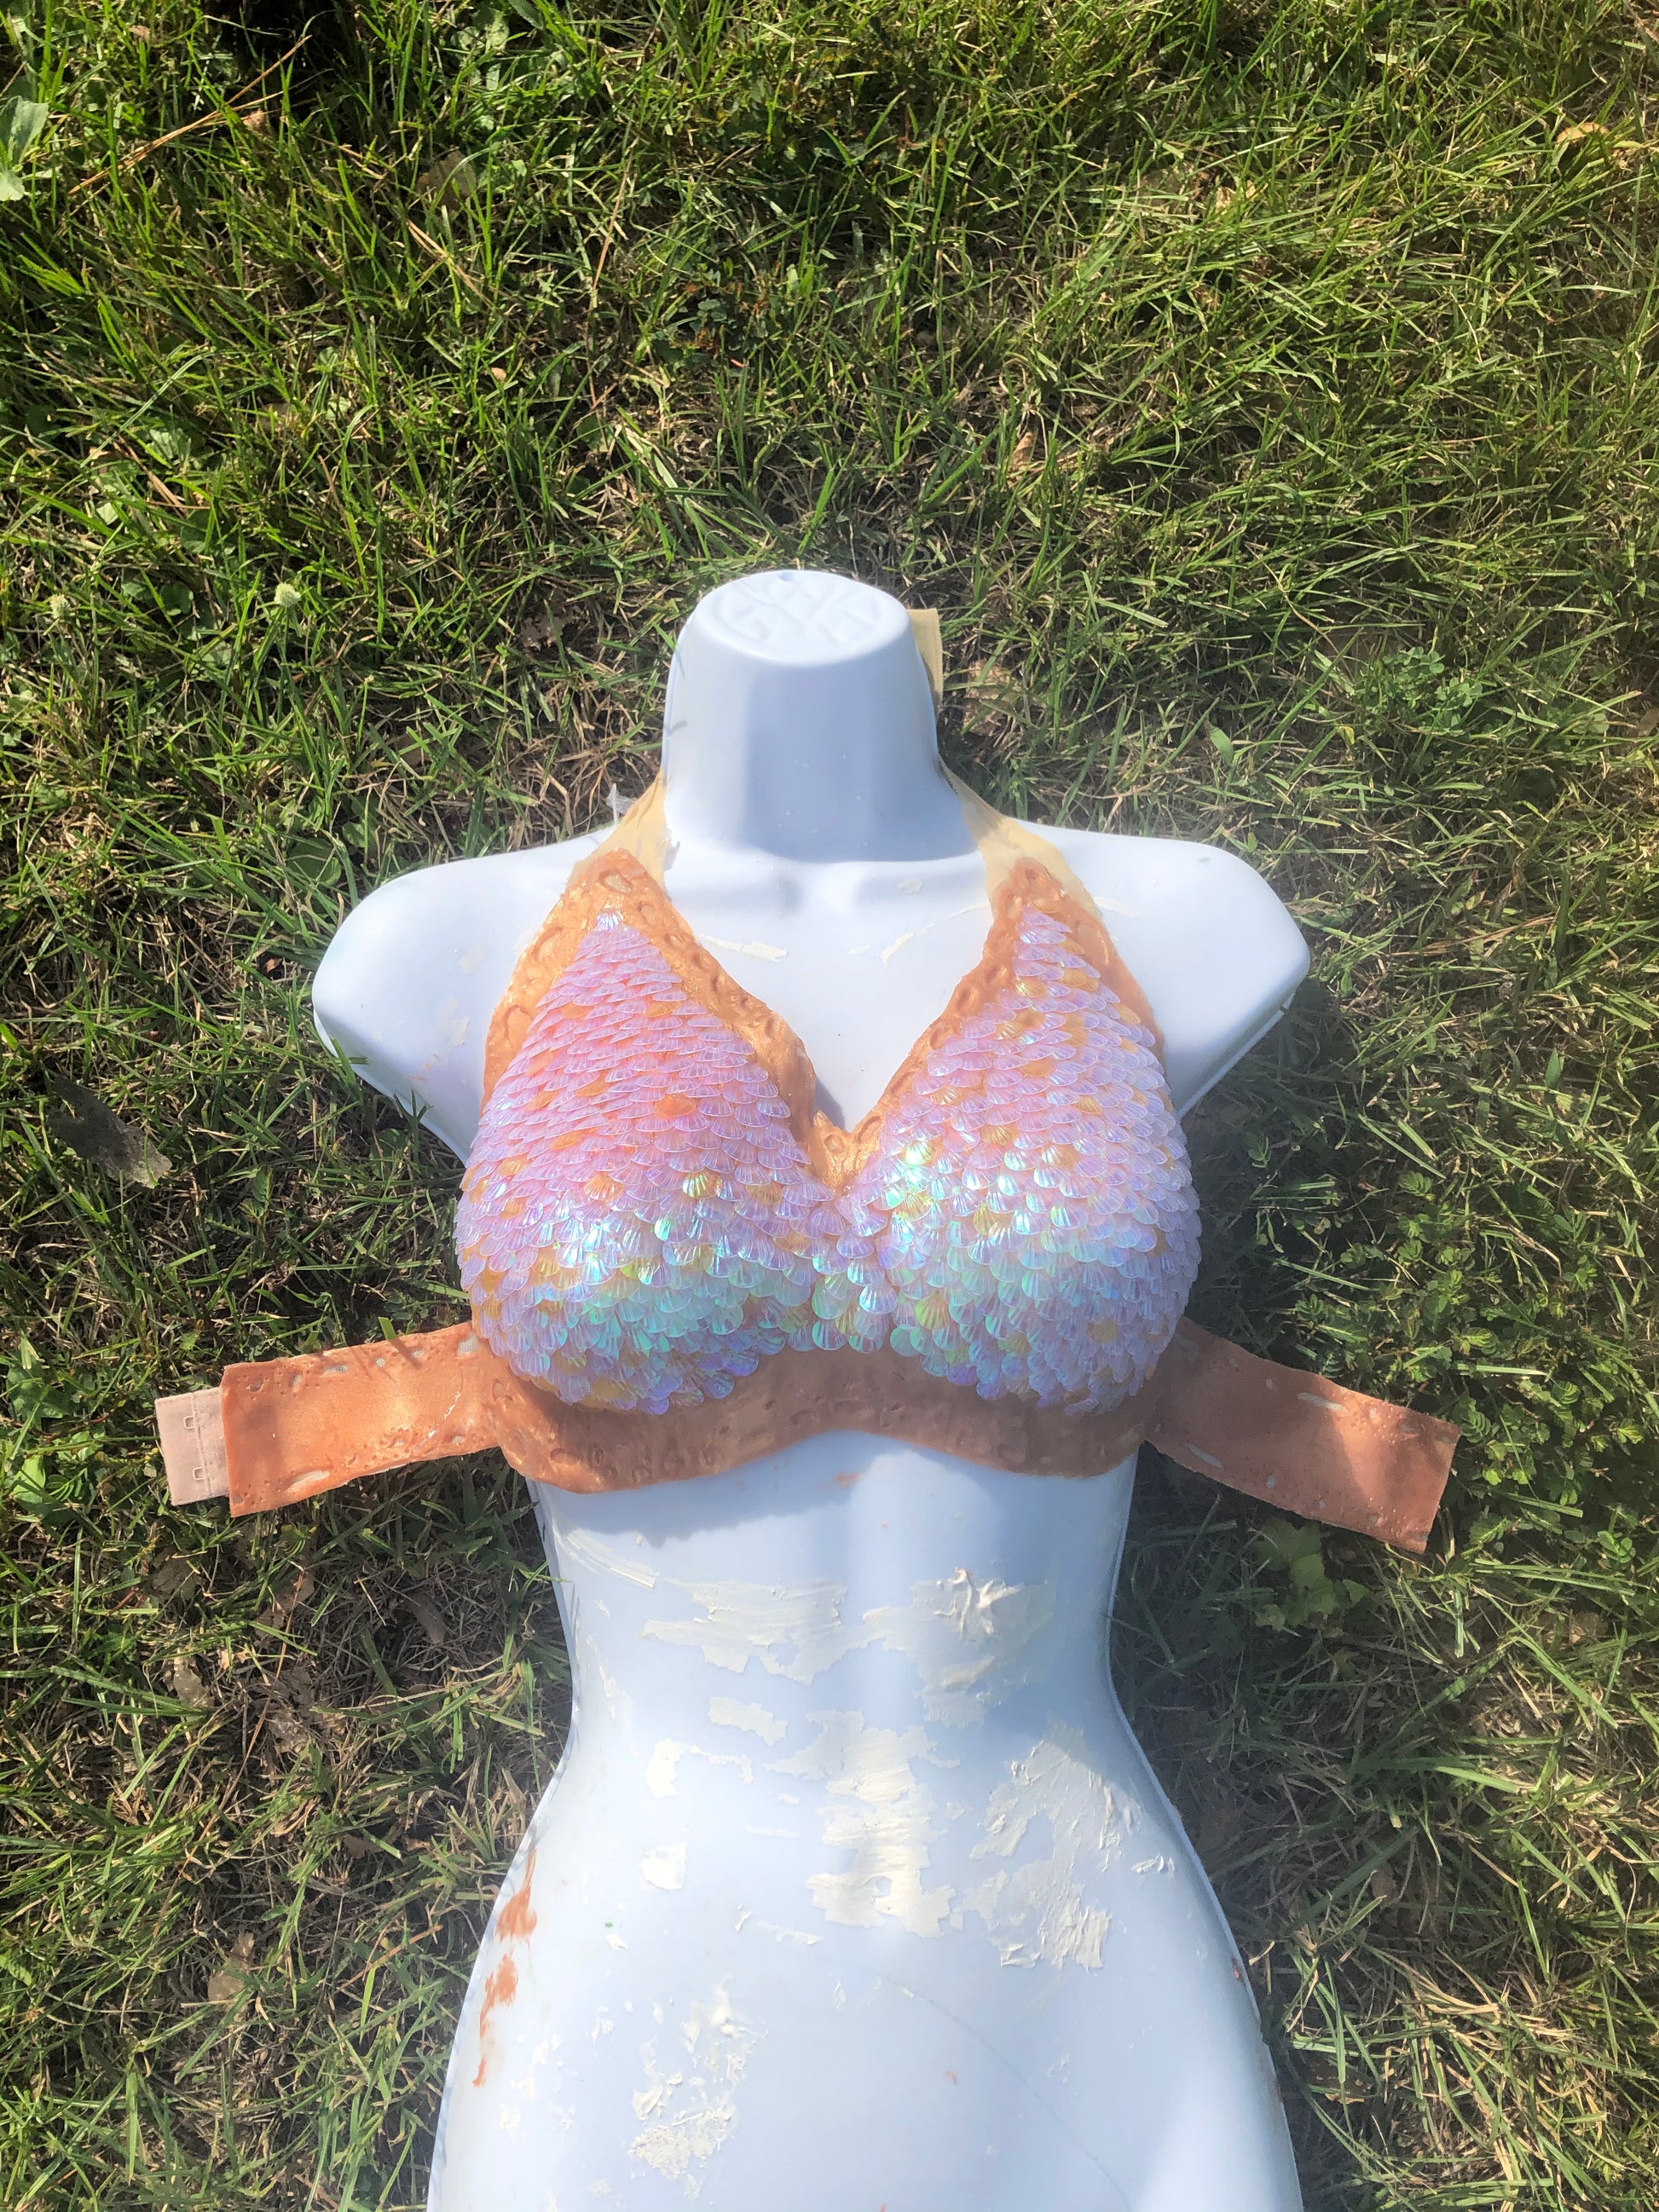 Budget Silicone Top H2o Mako Mermaid Bra cheaper Prices on My